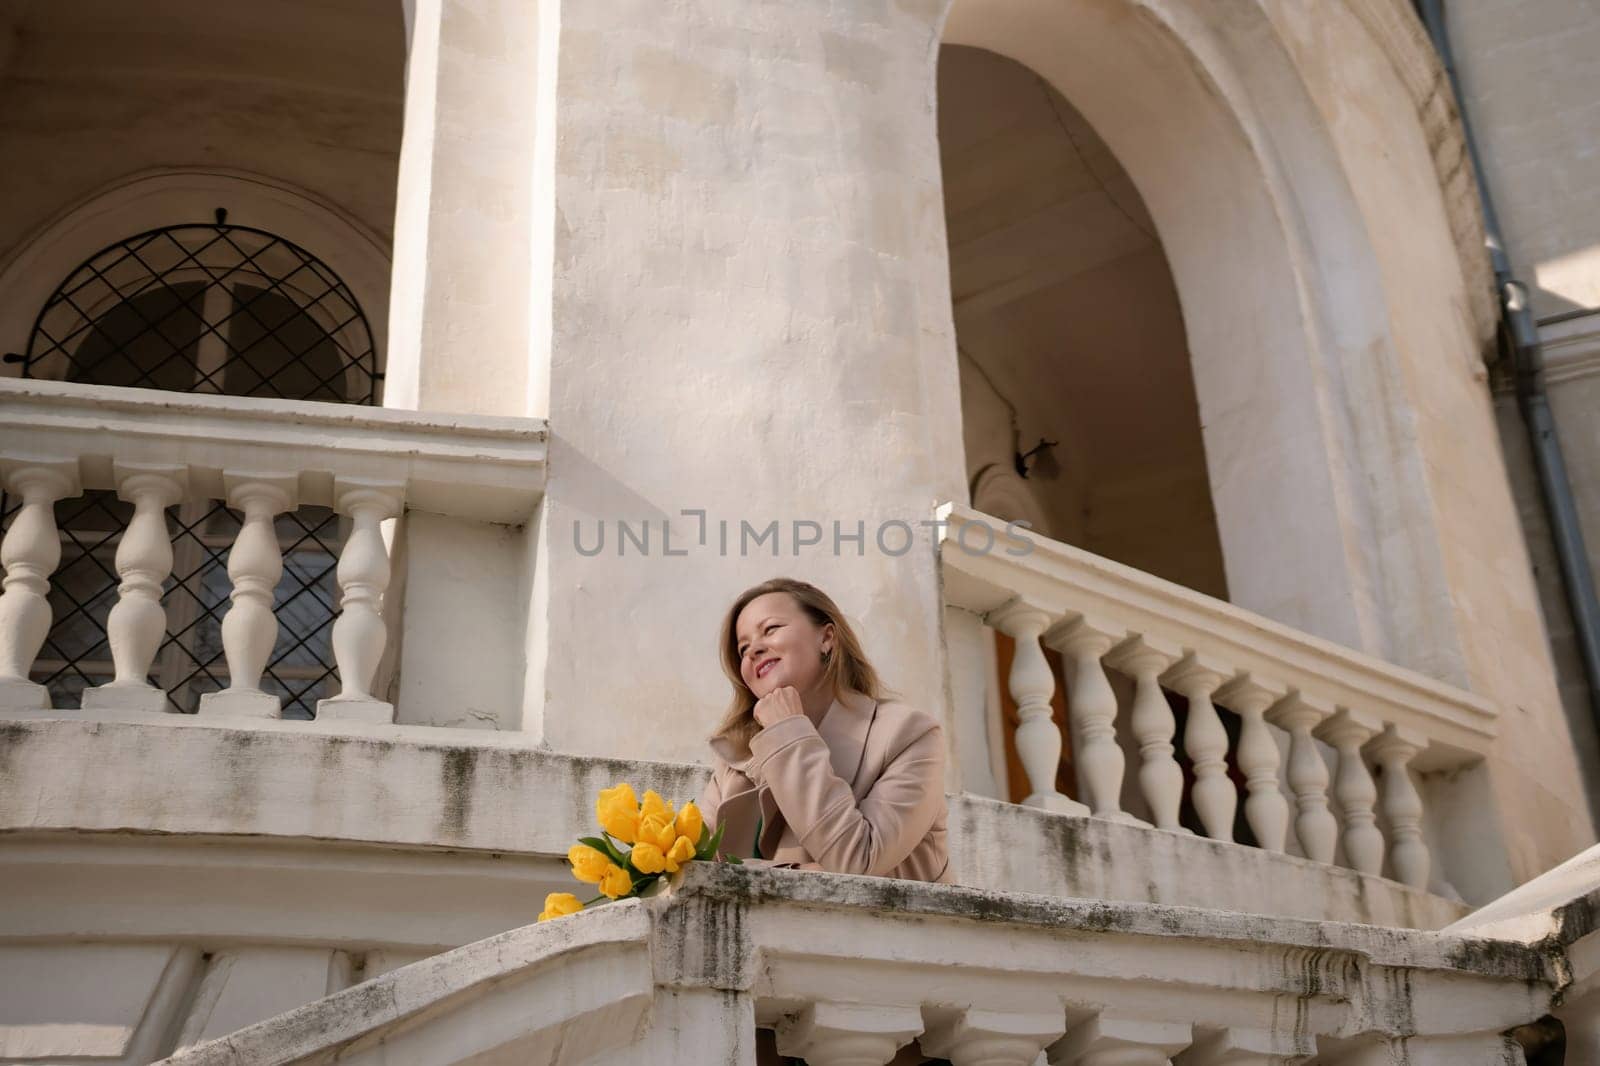 A woman wearing sunglasses and holding a bouquet of yellow flowers stands on a balcony. The scene is peaceful and serene, with the woman looking out over the city